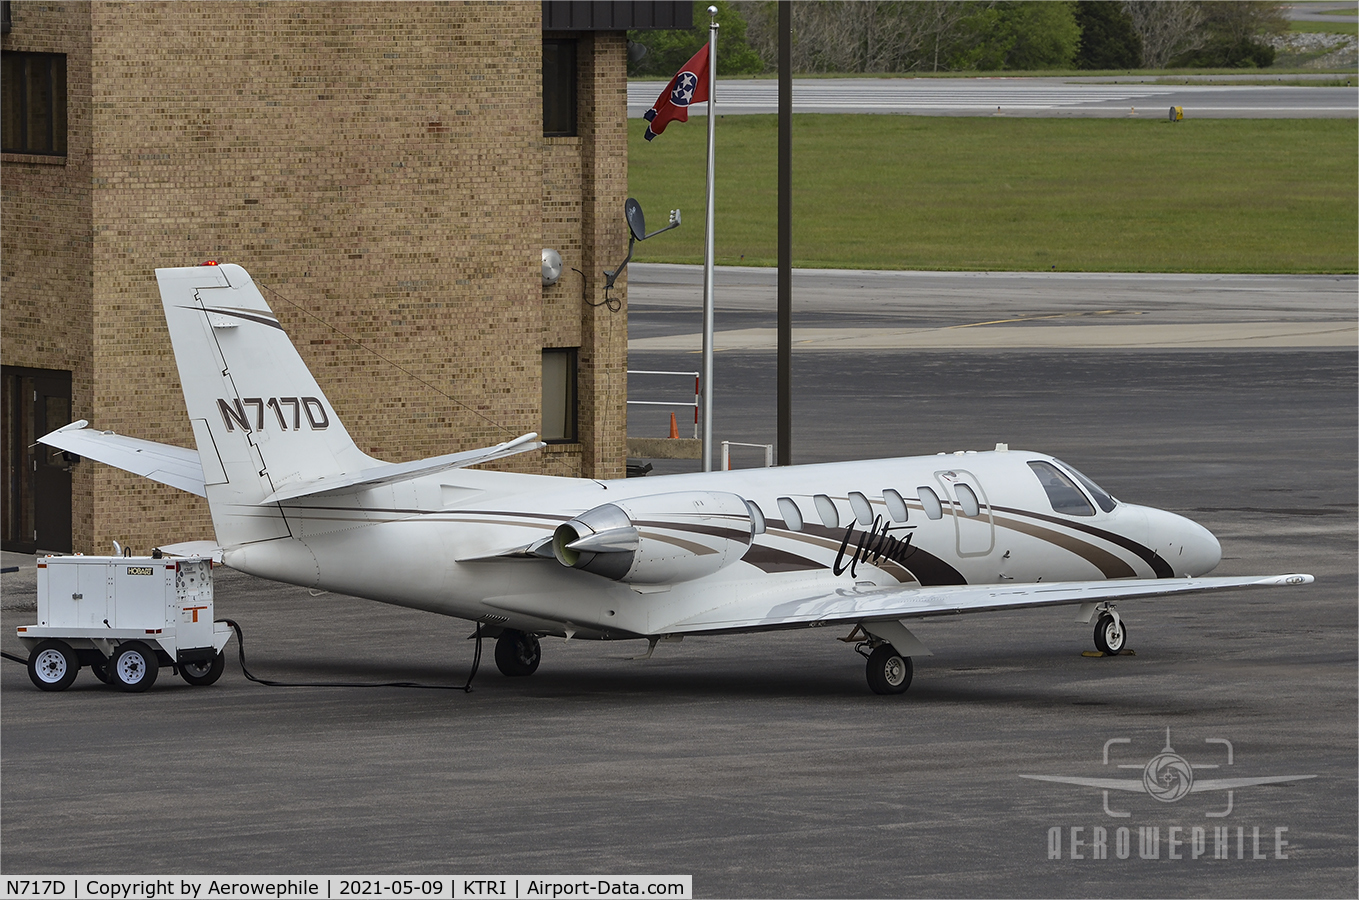 N717D, 1994 Cessna 560 Citation Ultra C/N 560-0275, Parked at Tri-Cities Airport (KTRI)
09May21